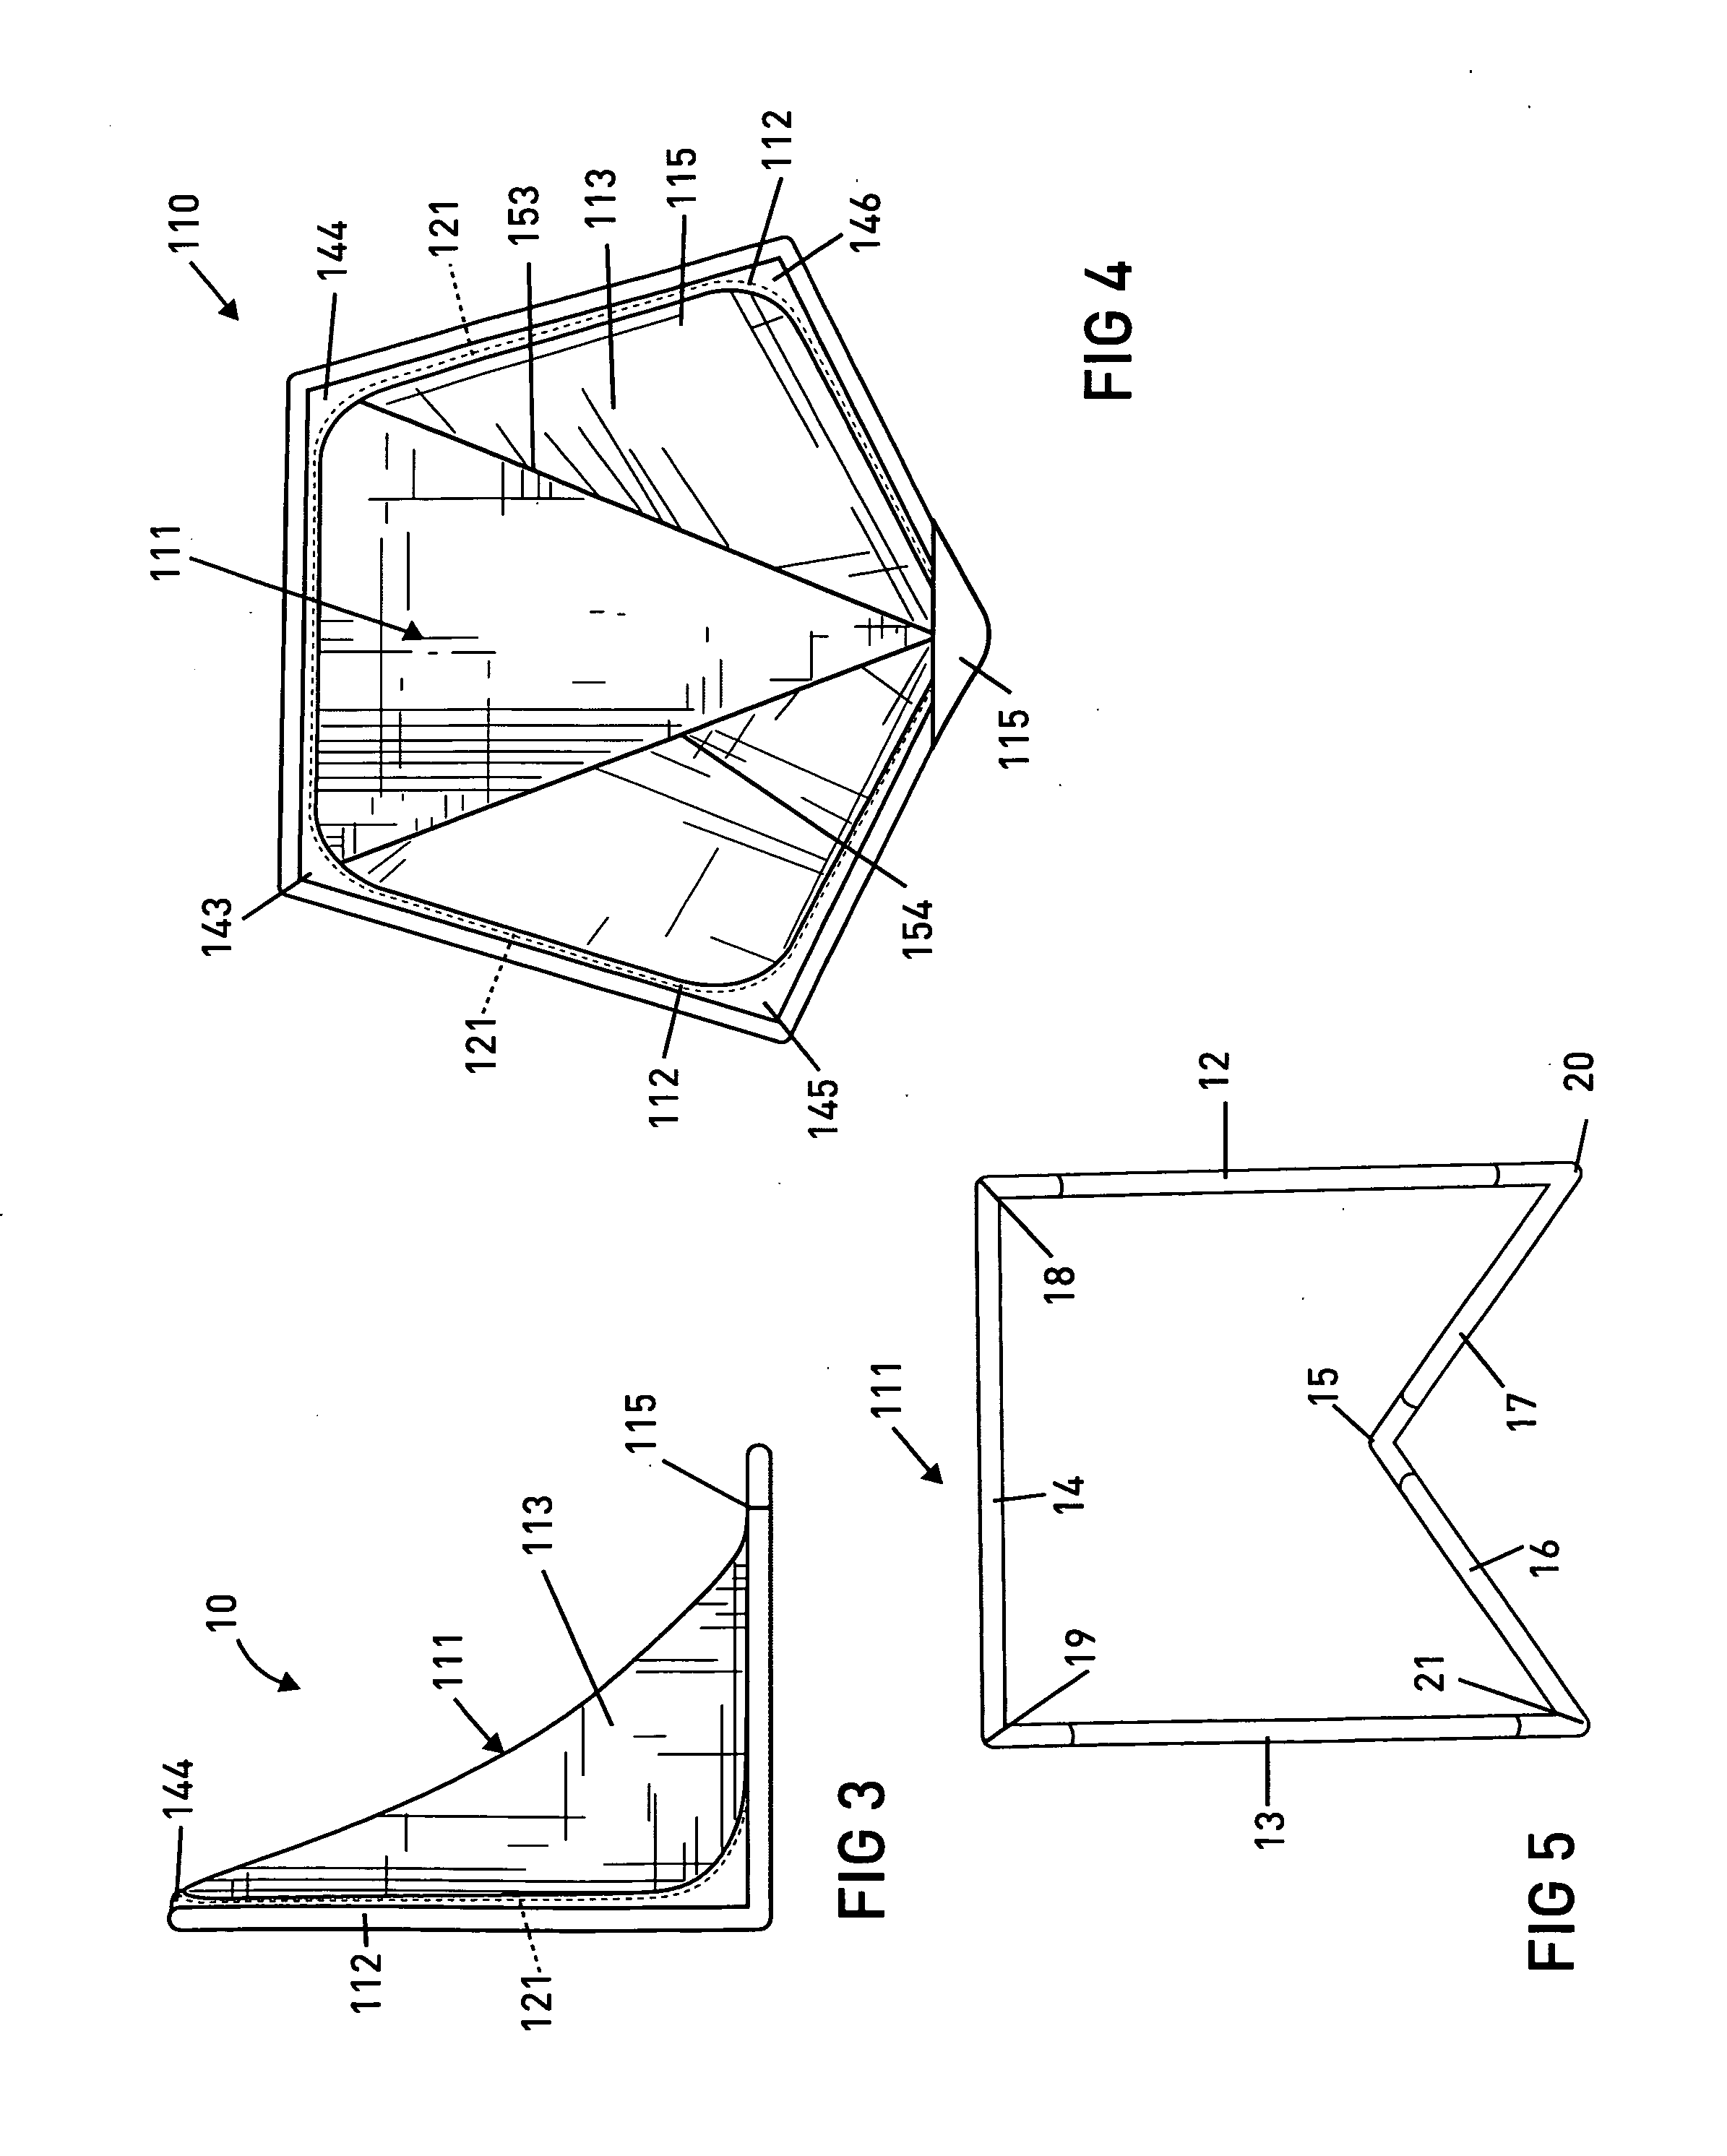 Detachable sports goal net device and system